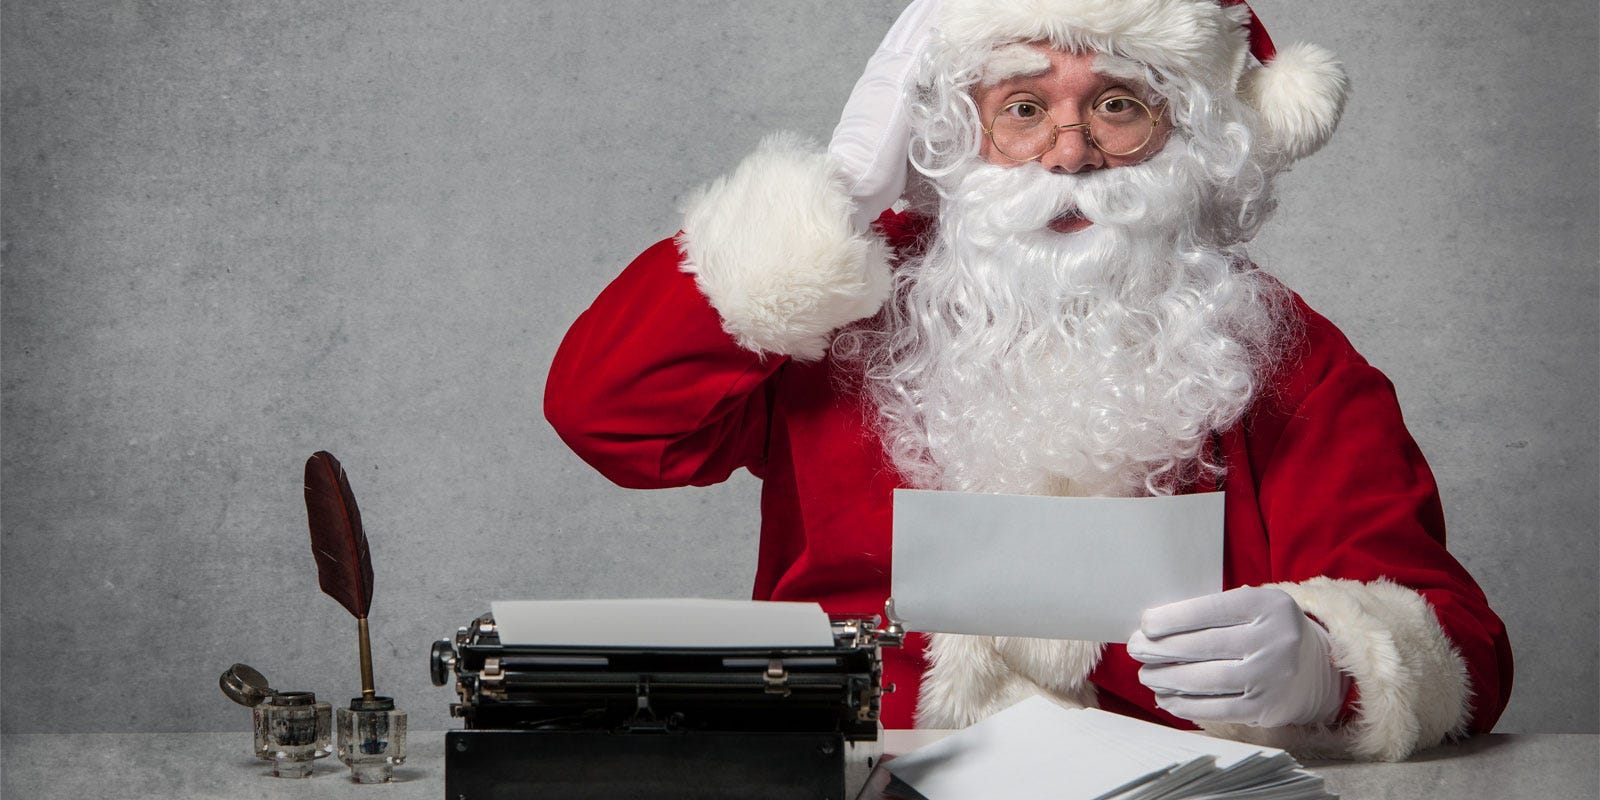 Santa trying to figure out what to write.